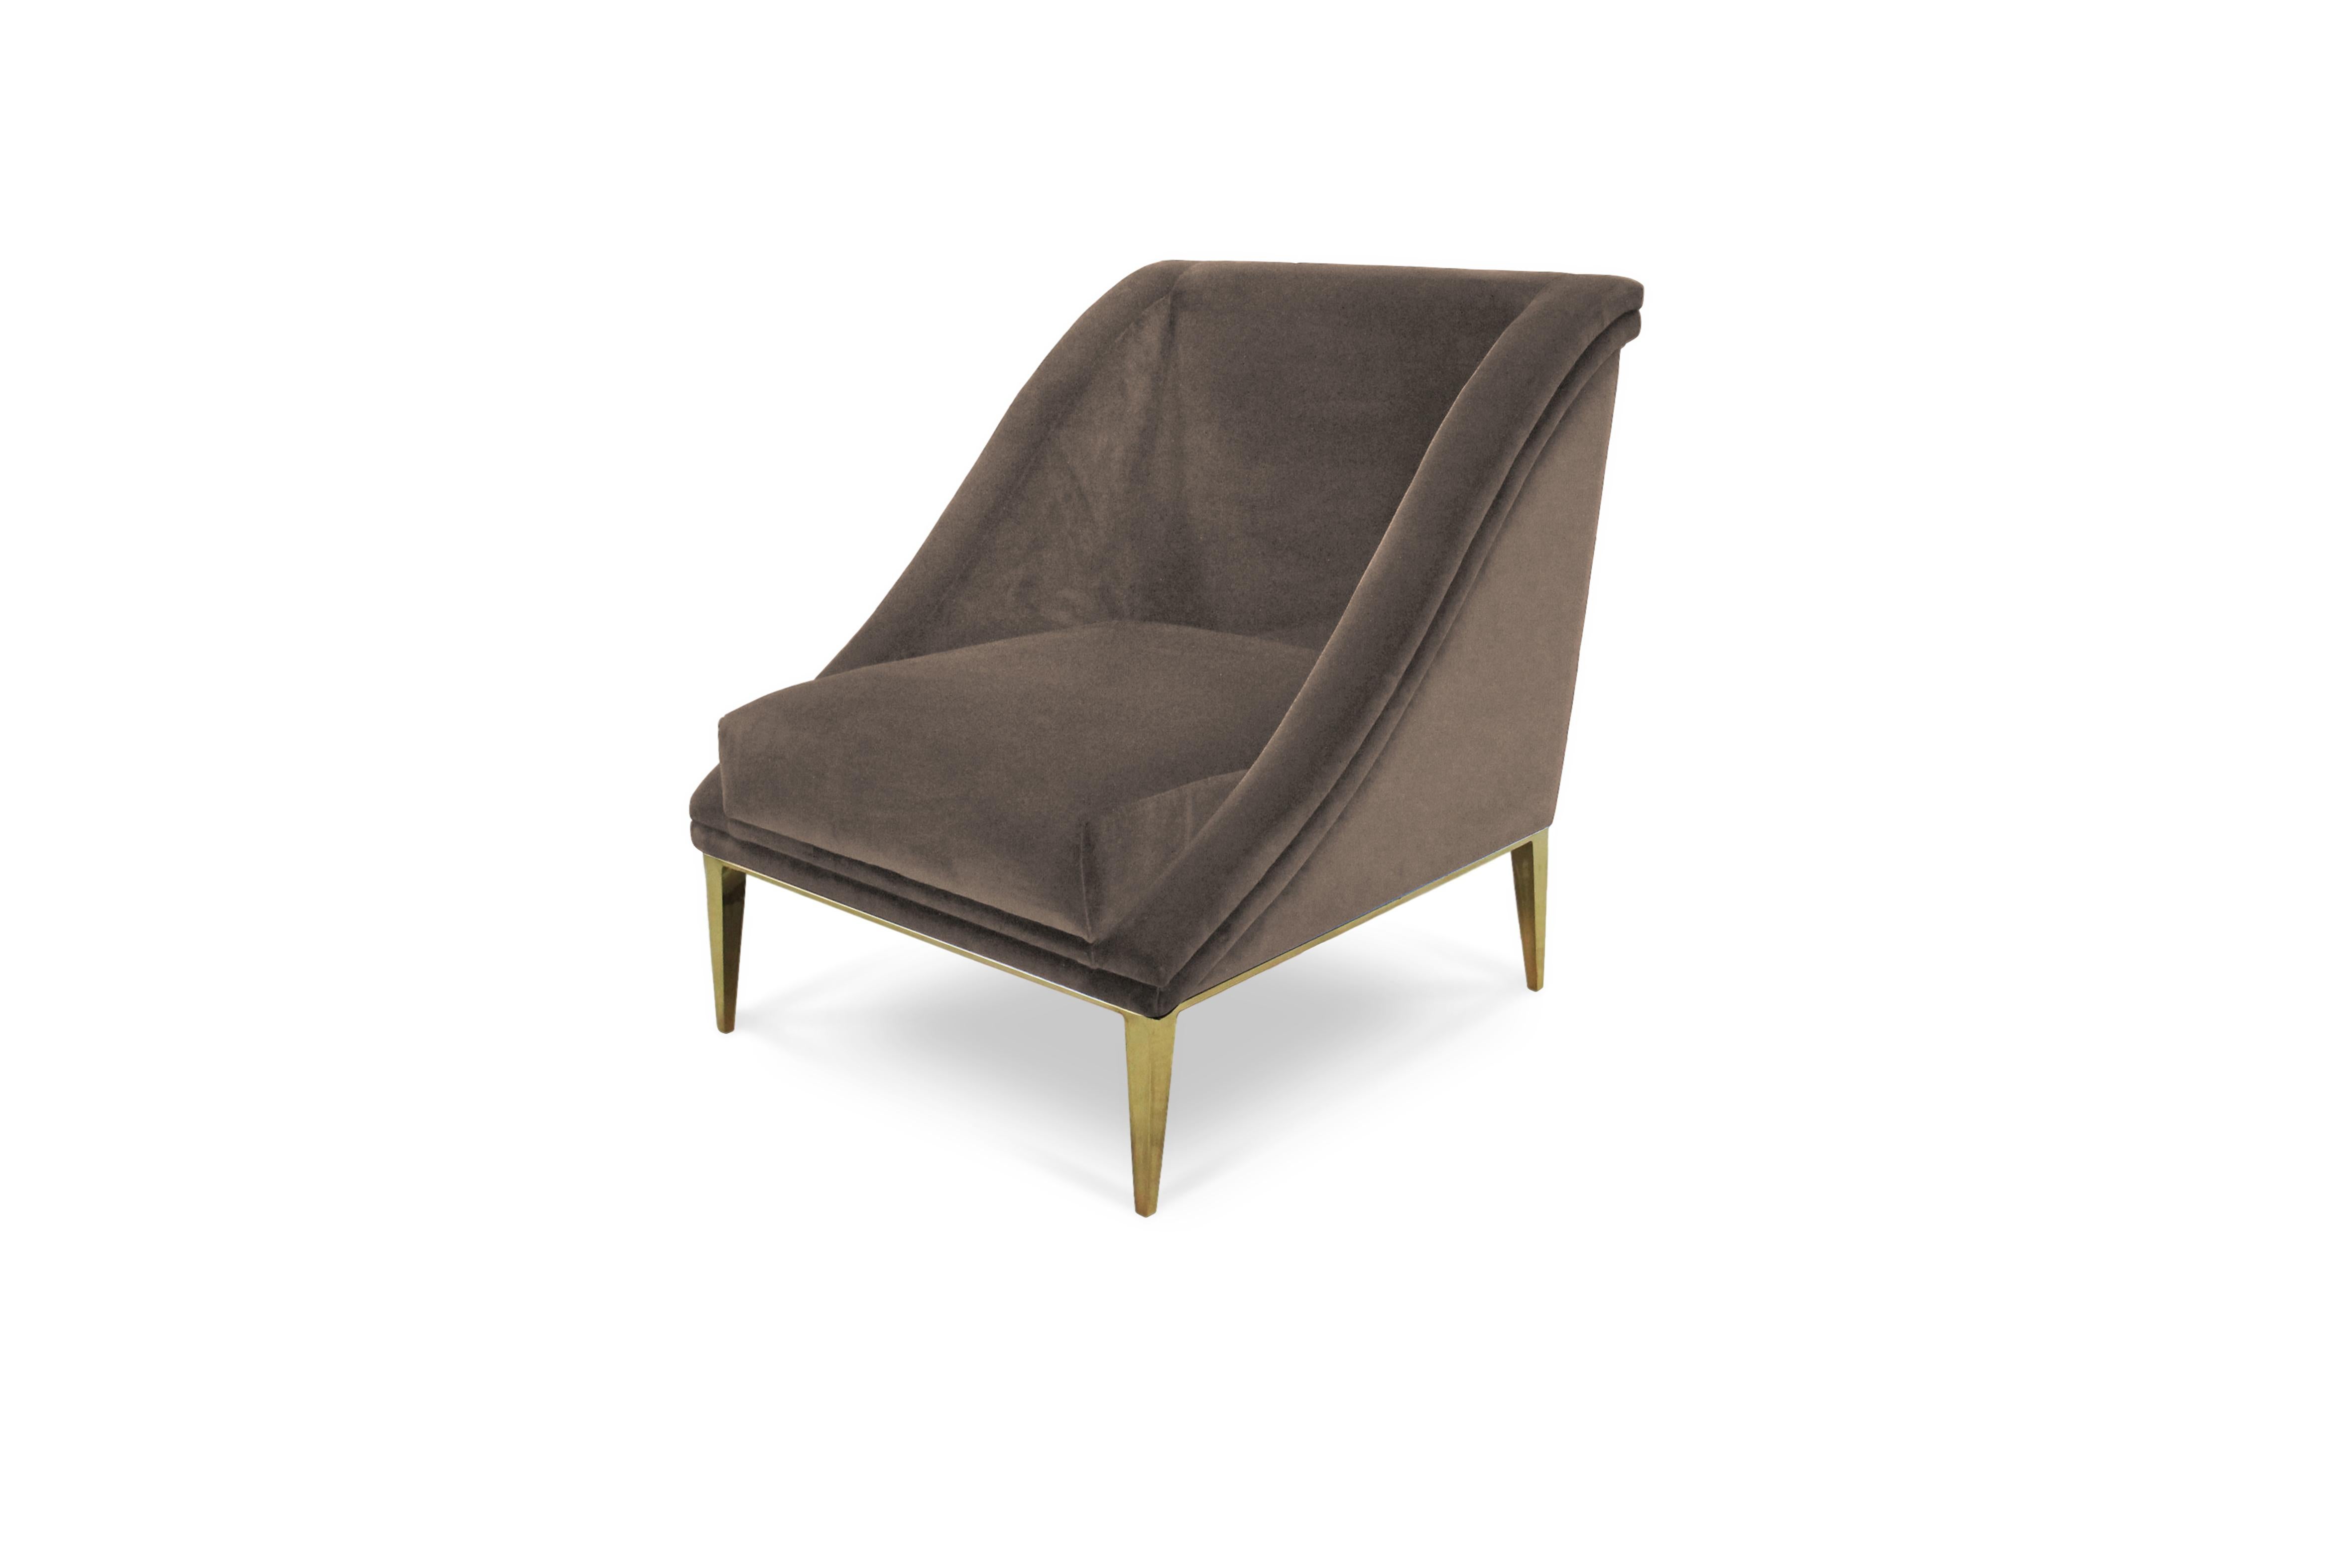 Designed to perform in a matter that indulges the eyes, the Geisha ‘s curves grace a room with the extravagance and poise of a Kyoto Geisha. This fully upholstered tight back chair is wrapped with a chic metal band leading to modern and sleek metal